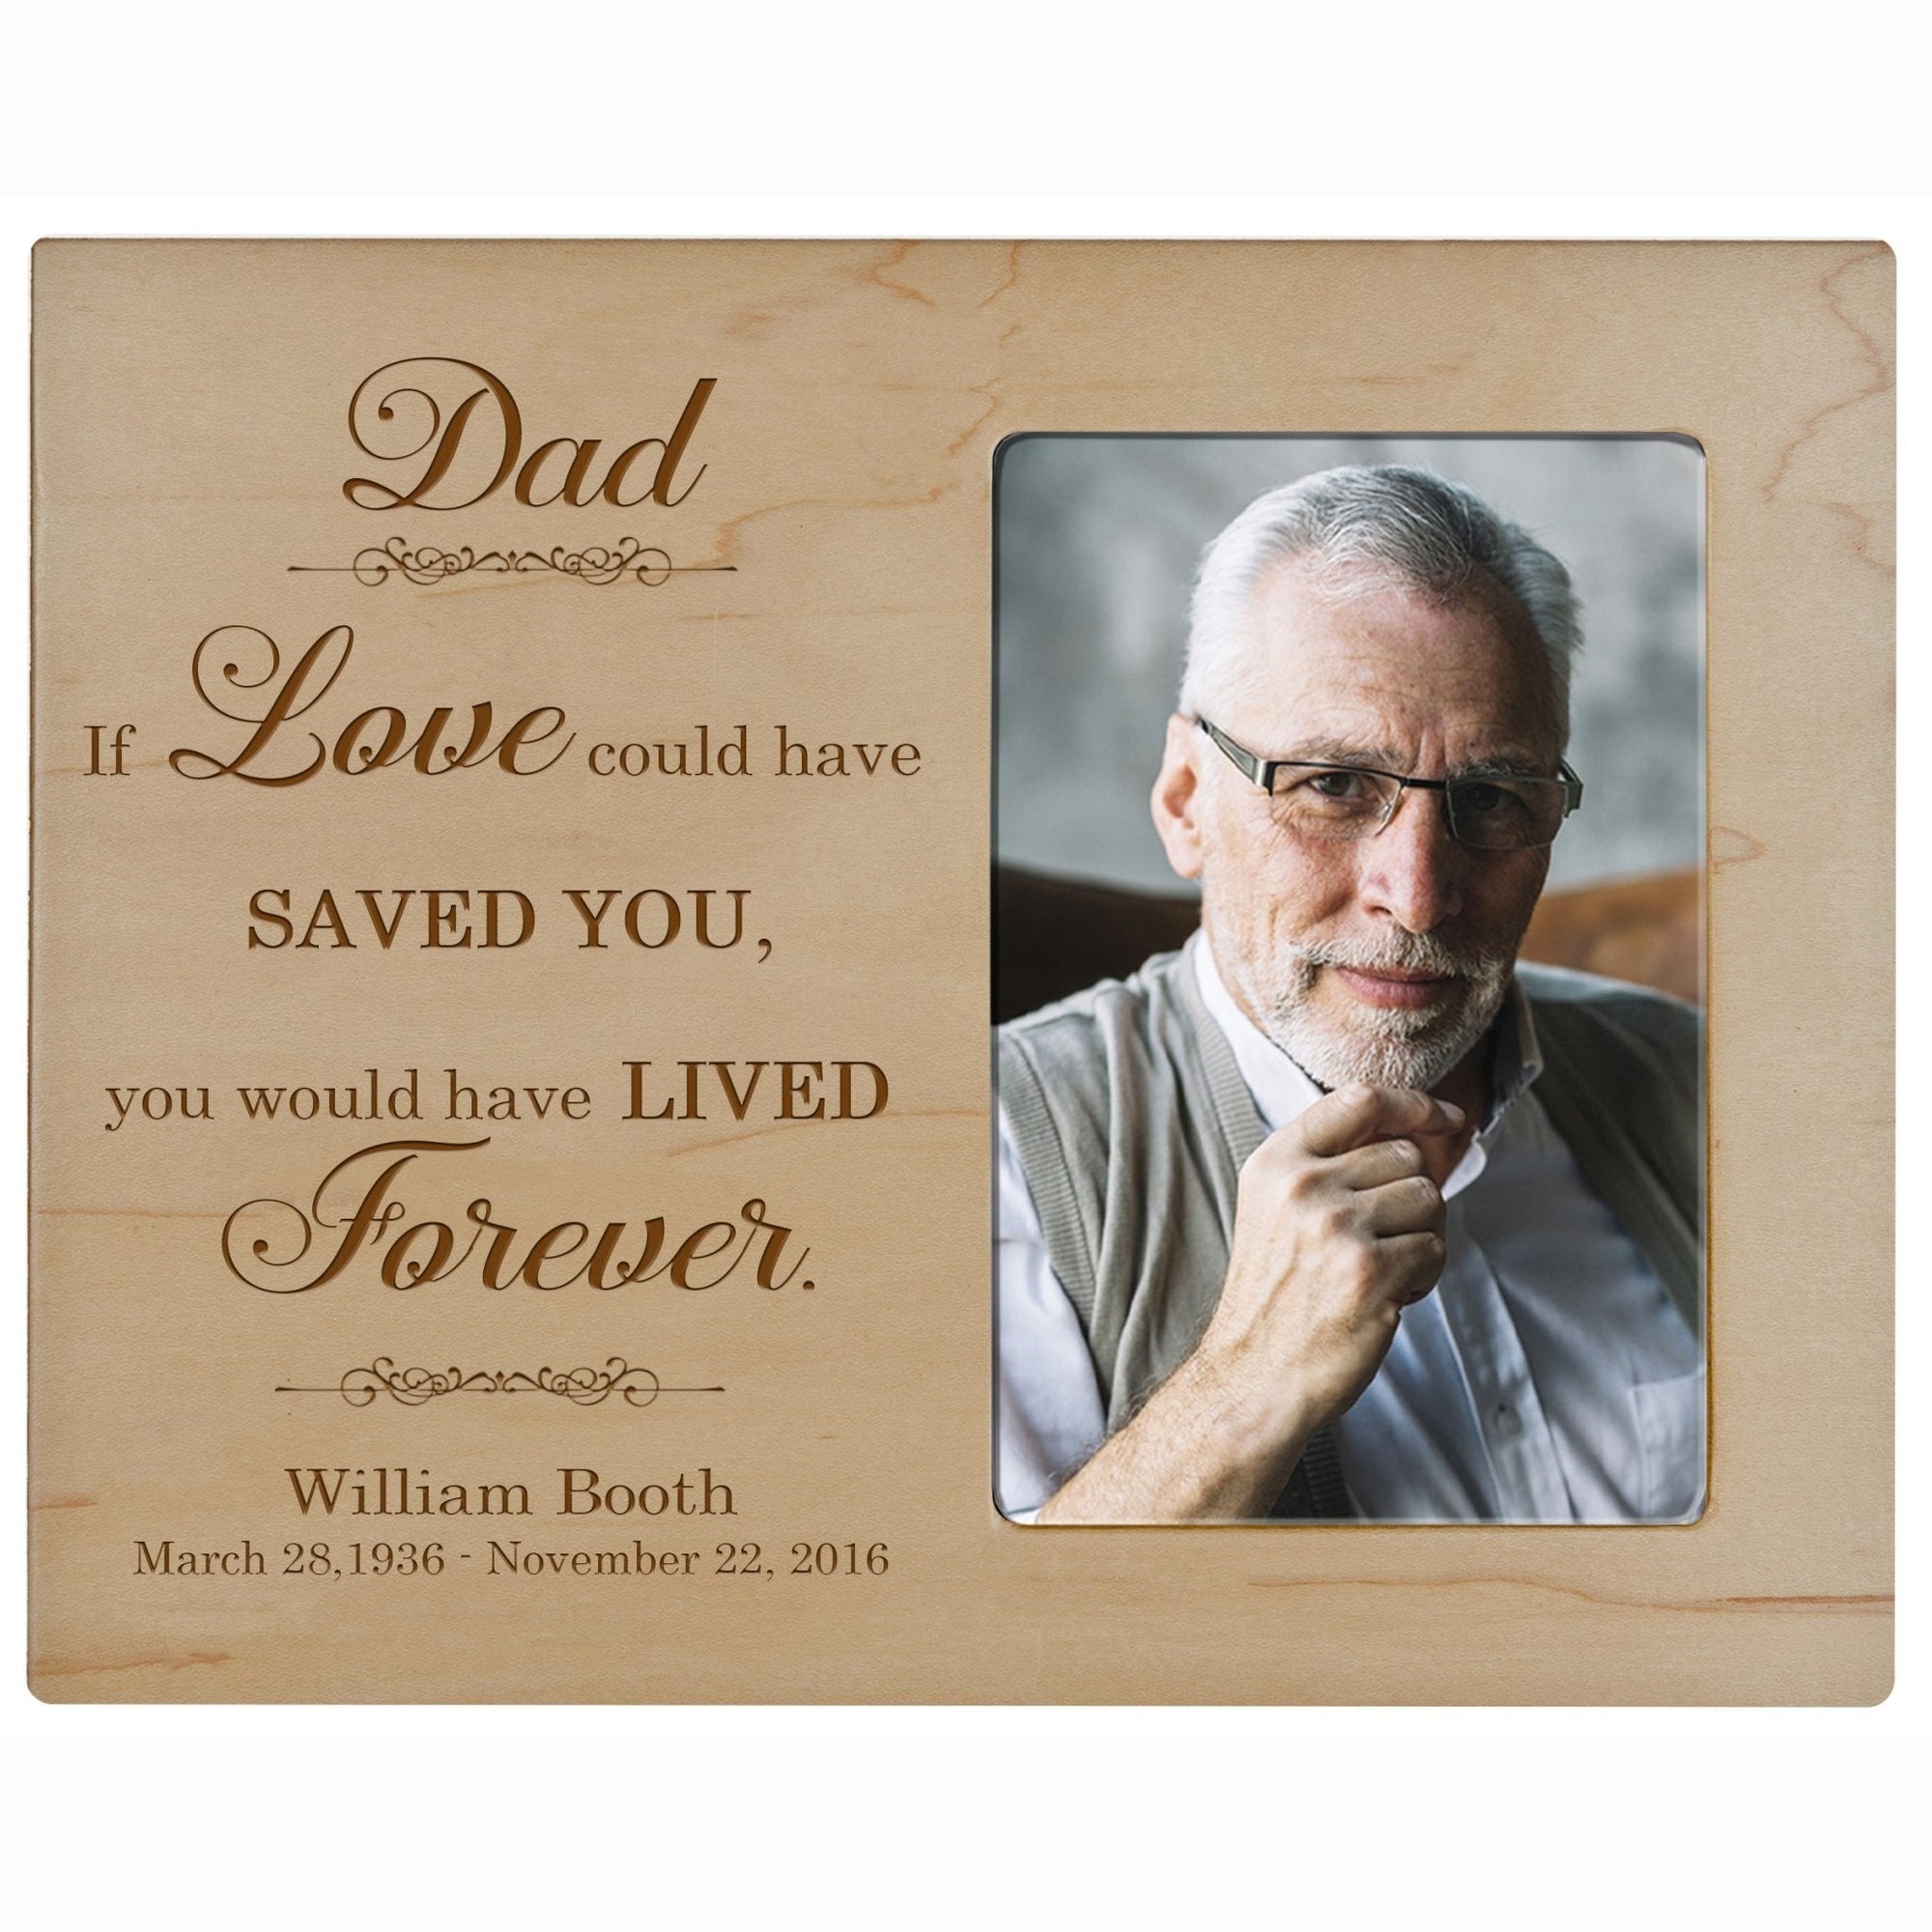 Personalized Horizontal 8x10 Wooden Memorial Picture Frame Holds 4x6 Photo - Dad, If Love Could - LifeSong Milestones